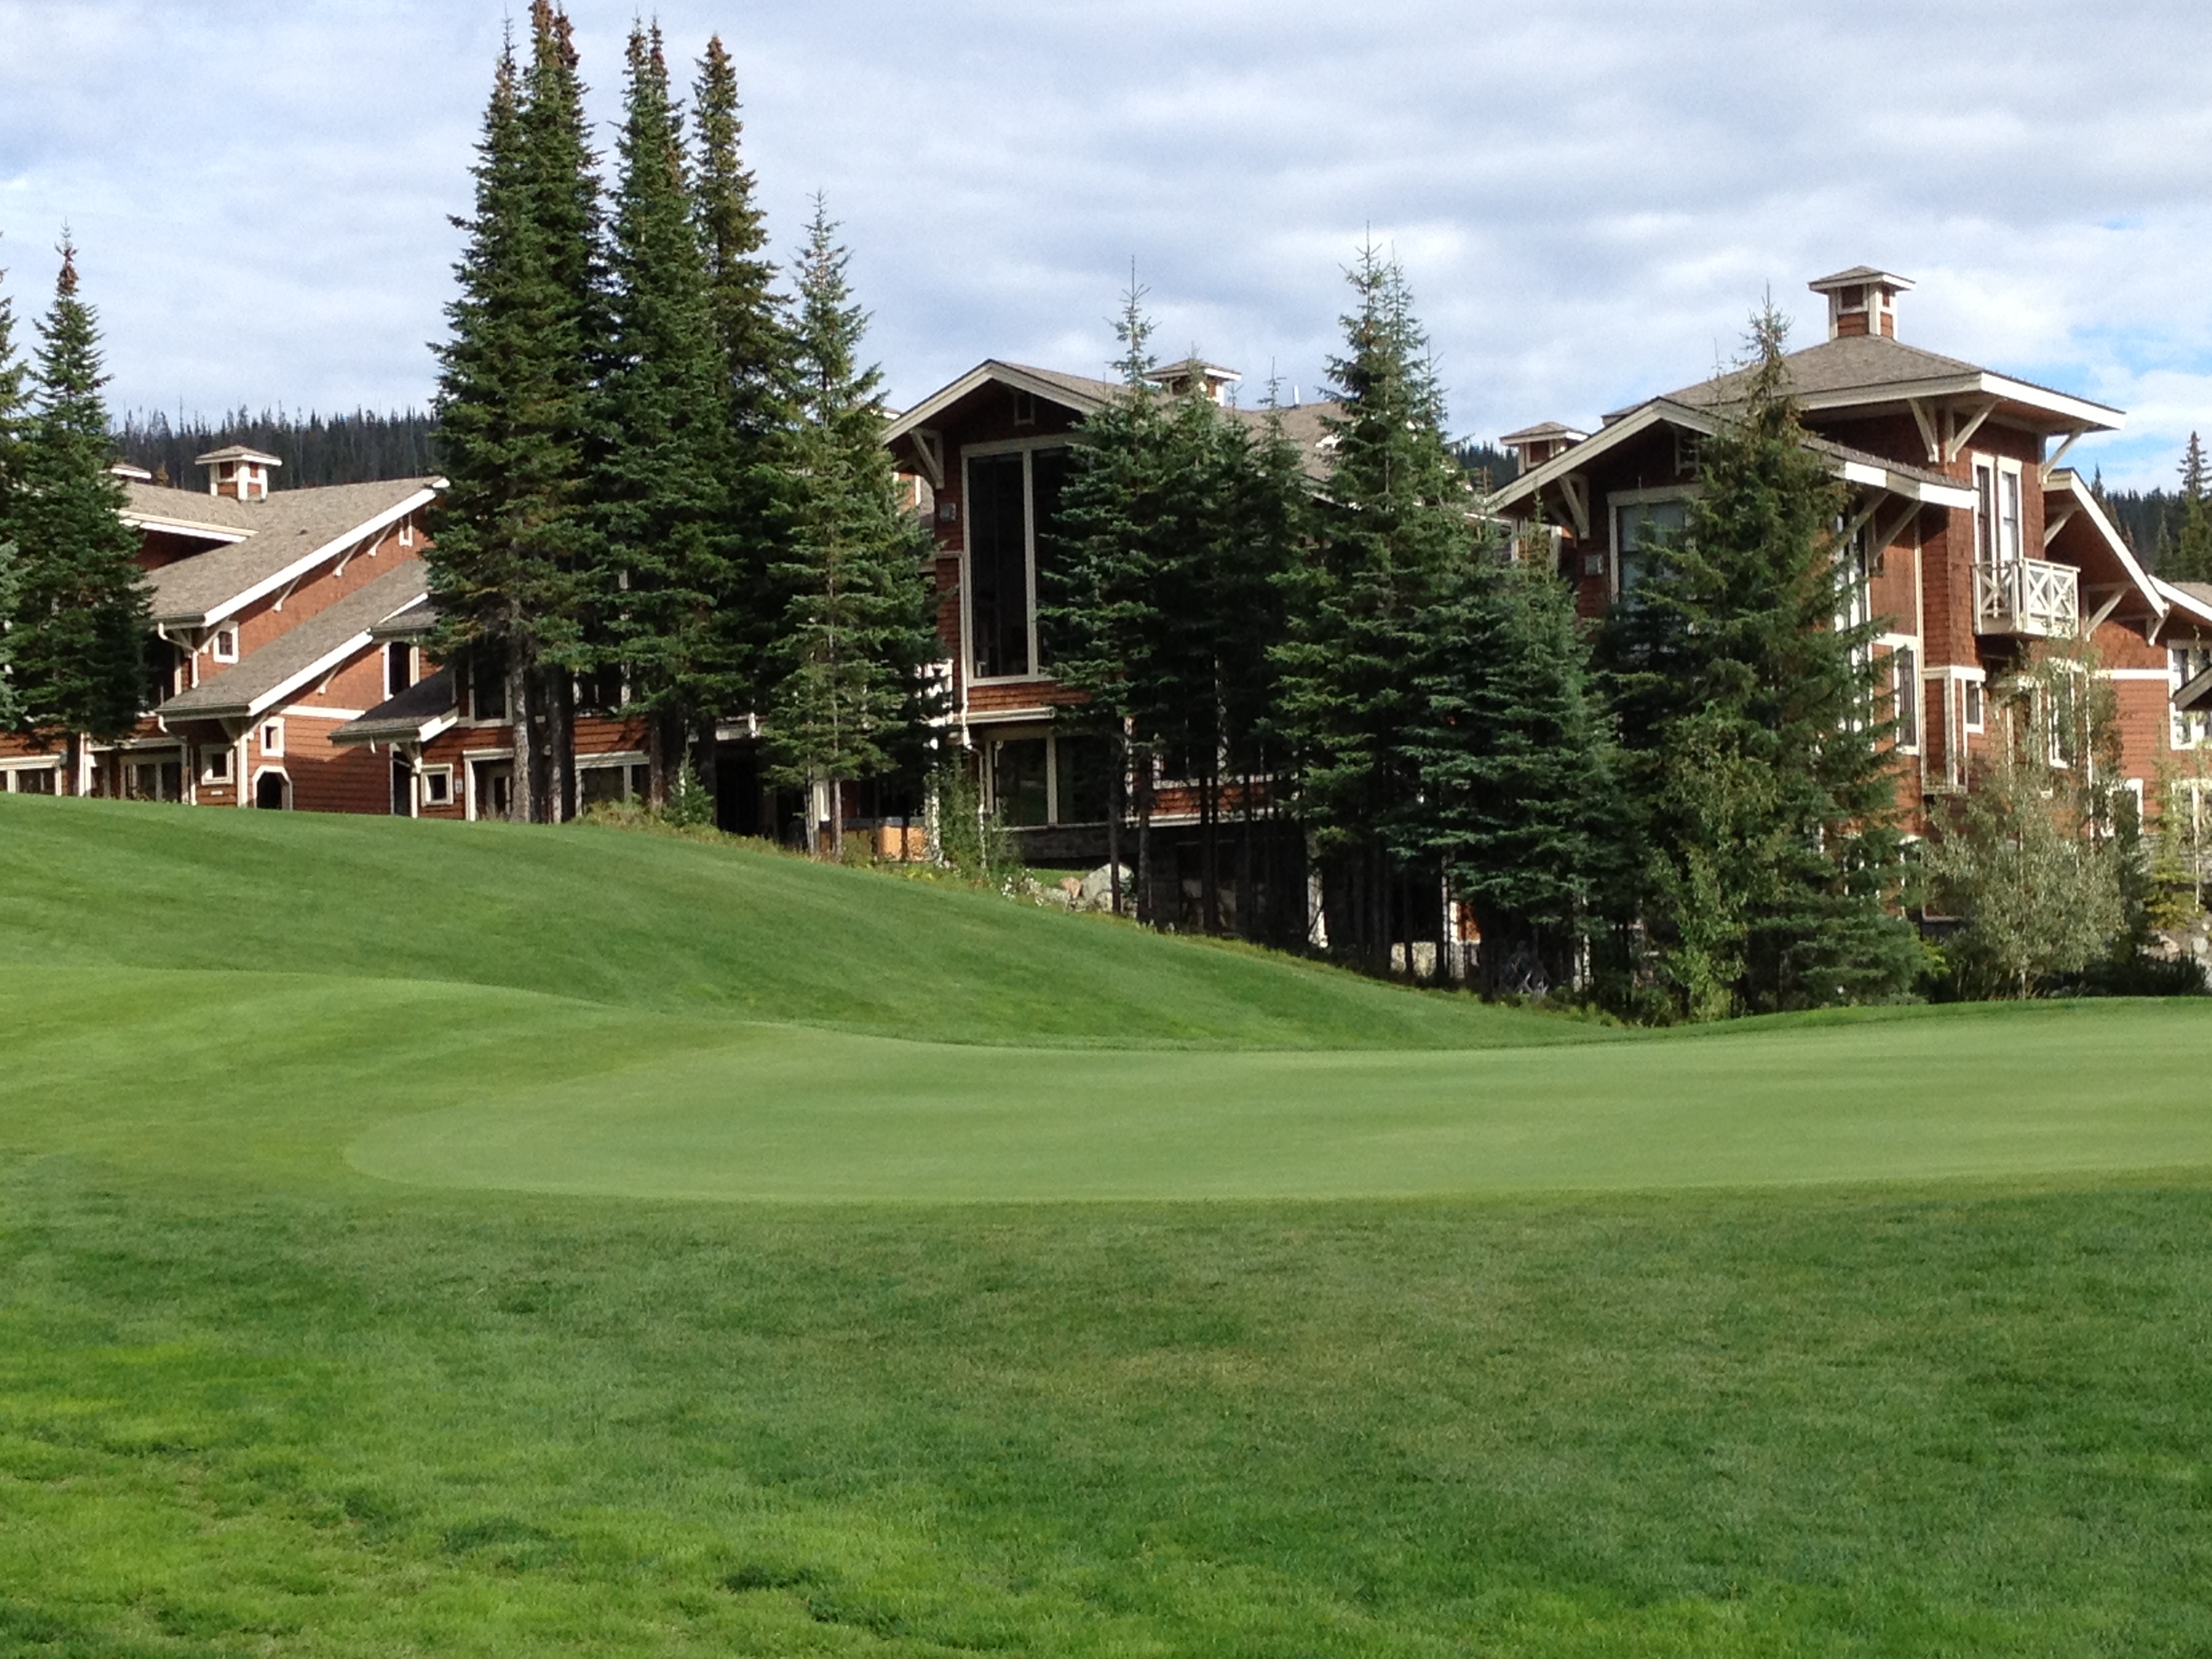 Stone's Throw condo backing onto the 16th Fairway - highest elevation tee in BC!